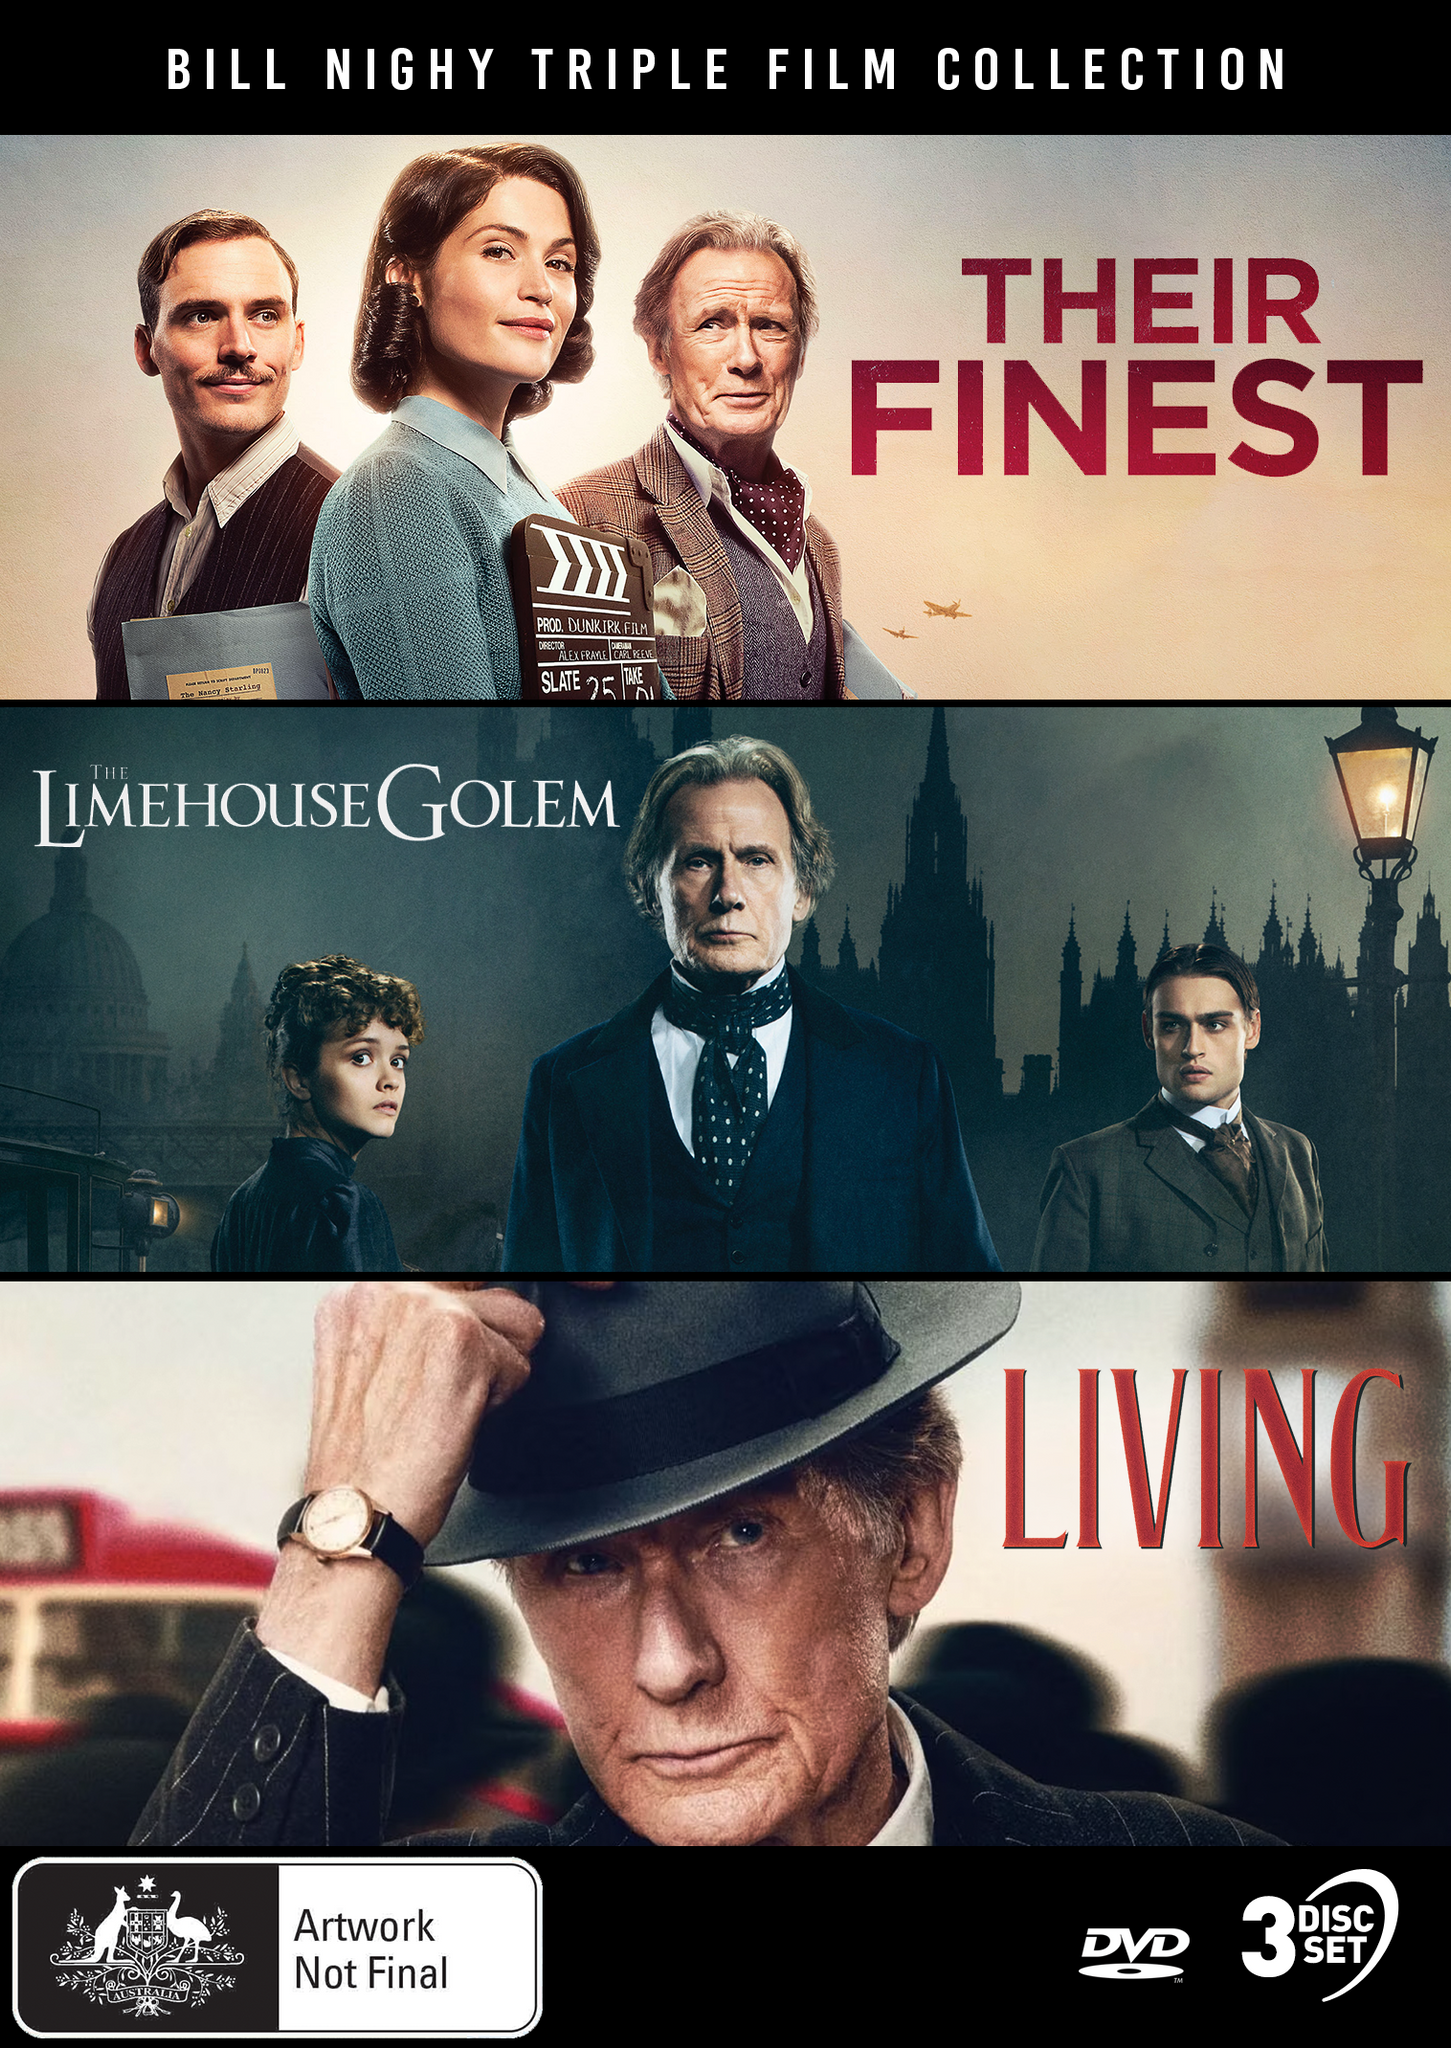 BILL NIGHY: TRIPLE FILM COLLECTION (THEIR FINEST / THE LIMEHOUSE GOLEM / LIVING) - DVD